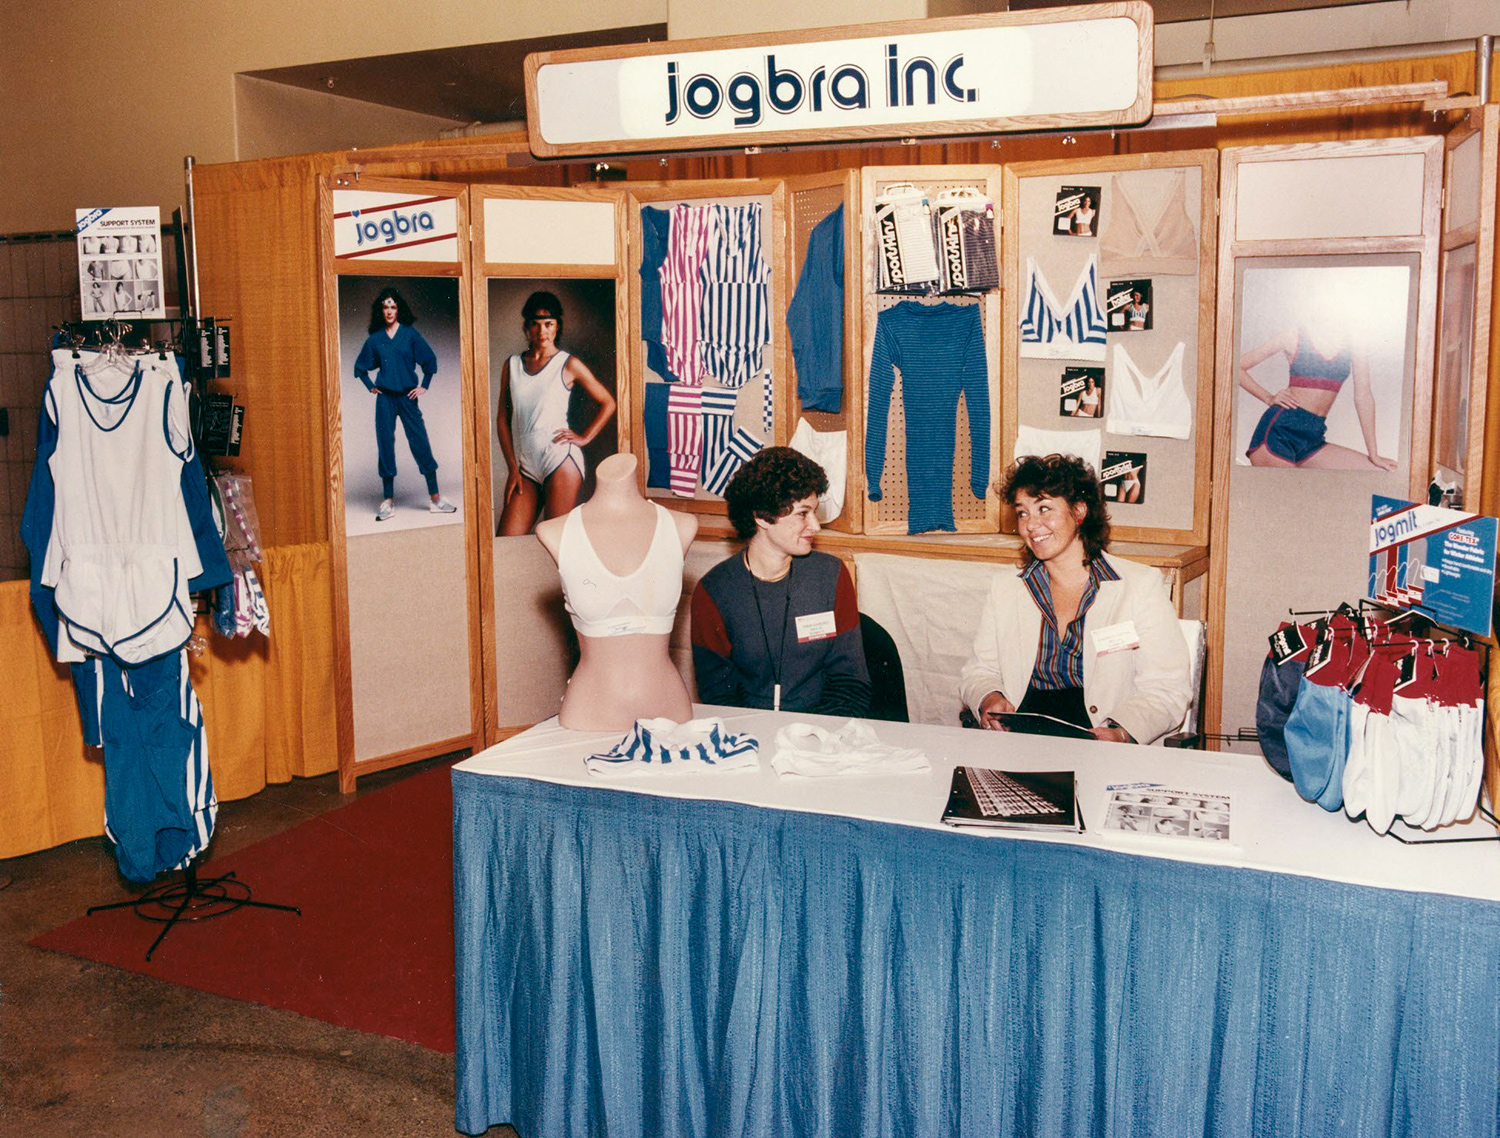 Hinda Miller and Lisa Lindahl sit at a booth surrounded by their merchandise.